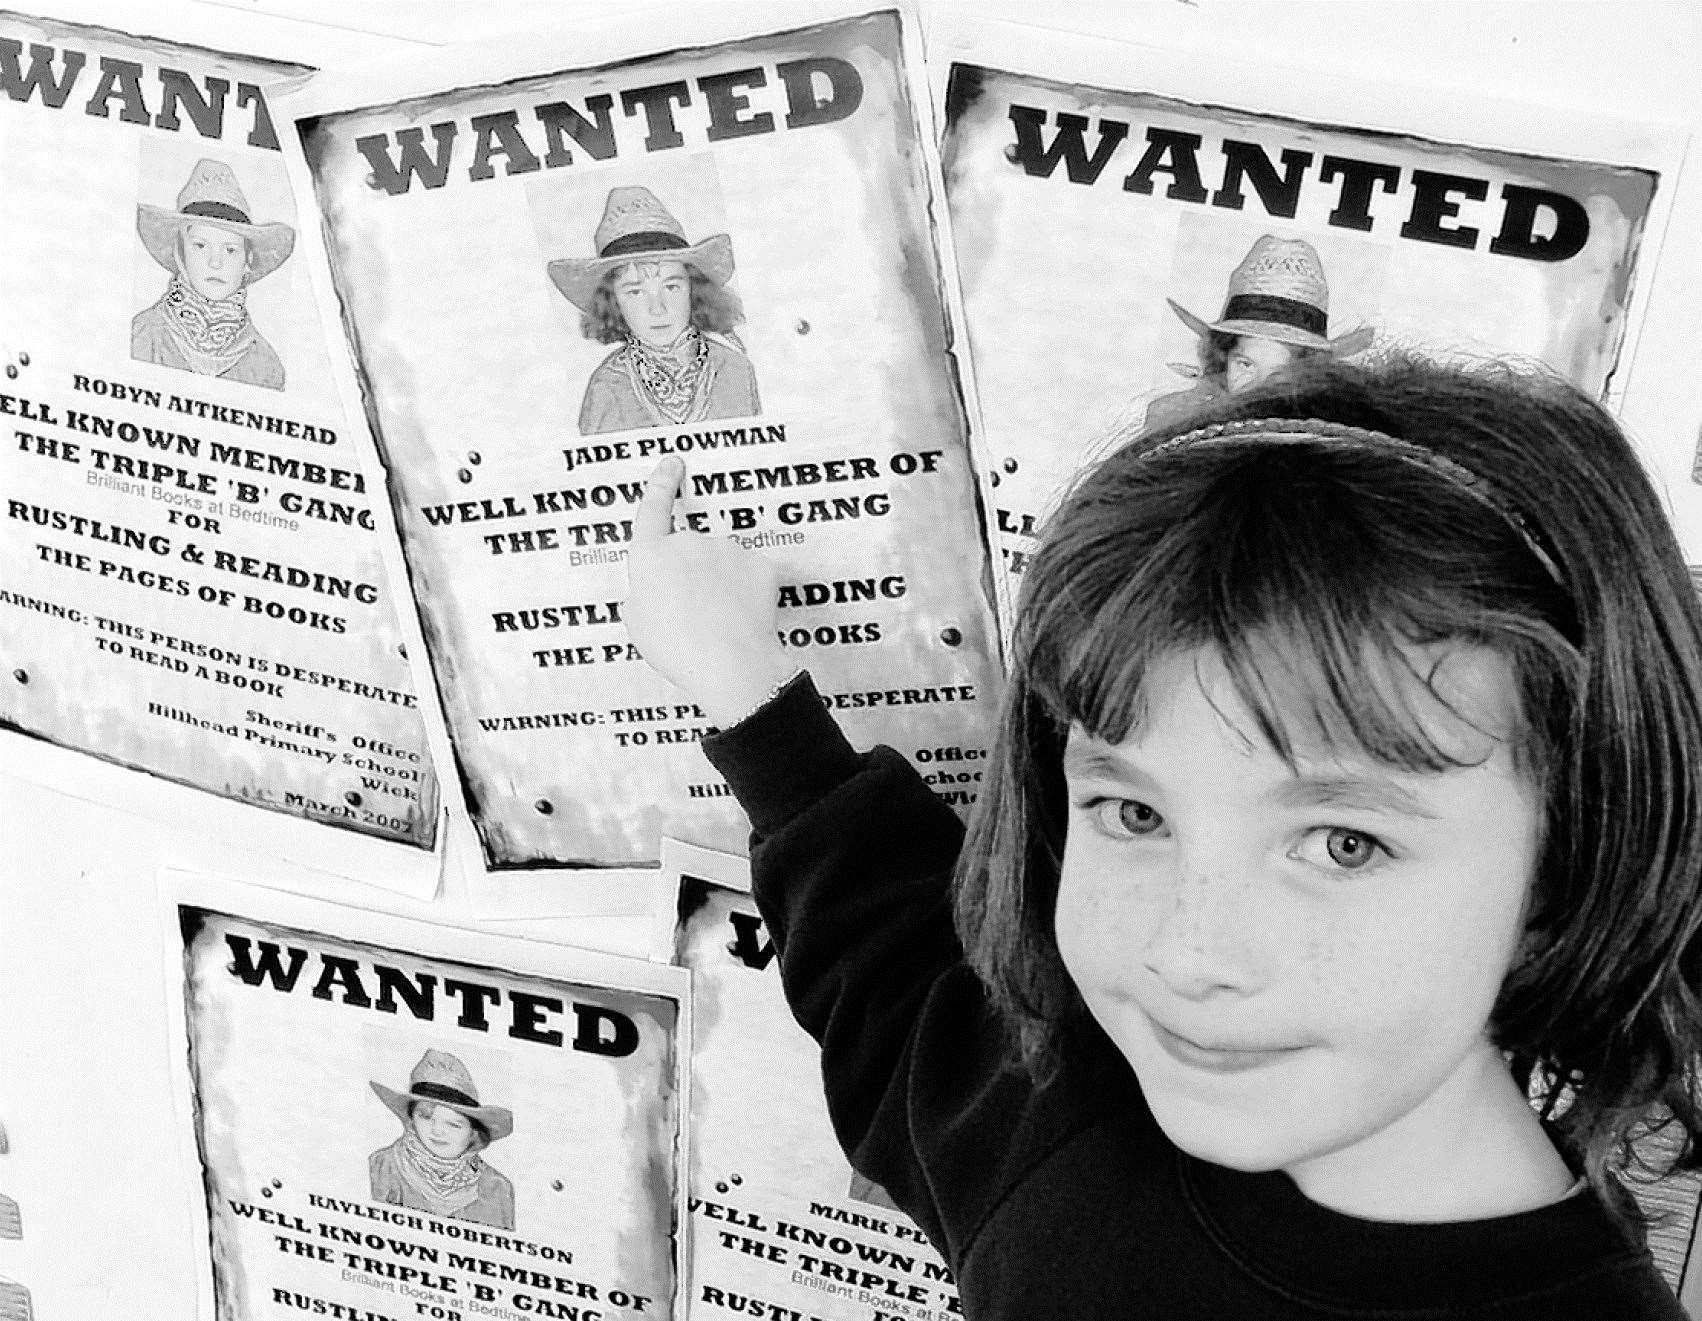 Hillhead P3 pupil Jade Plowman in 2007 pointing to her own ‘Wanted’ poster as a member of the Triple ‘B’ gang (Brilliant Books at Bedtime), a reading initiative that ran for 16 weeks.